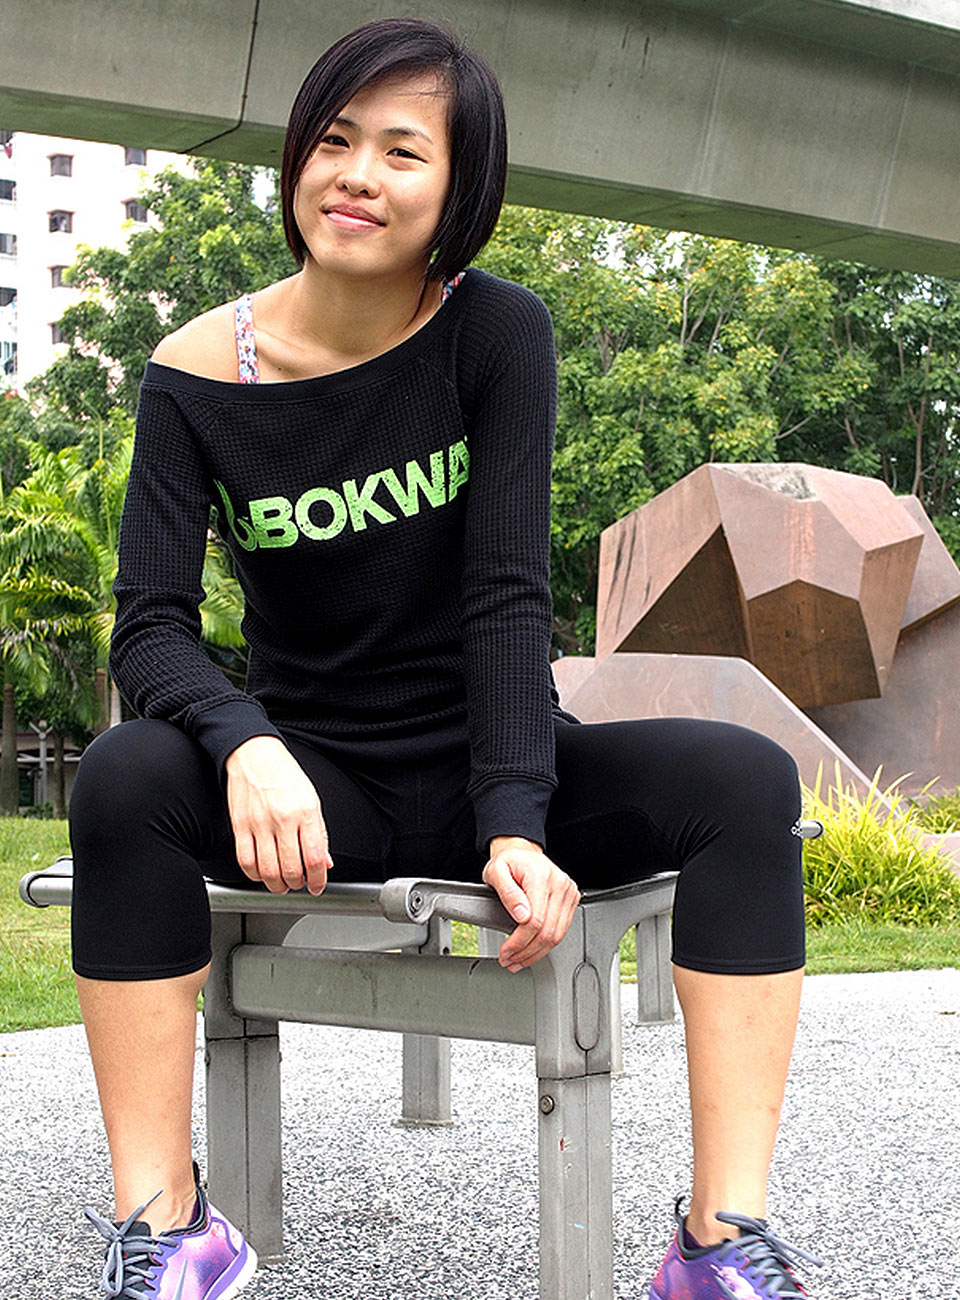 Yong Pei Lin: How Bokwa Fitness and Healthy Eating Changed Her Life Forever!